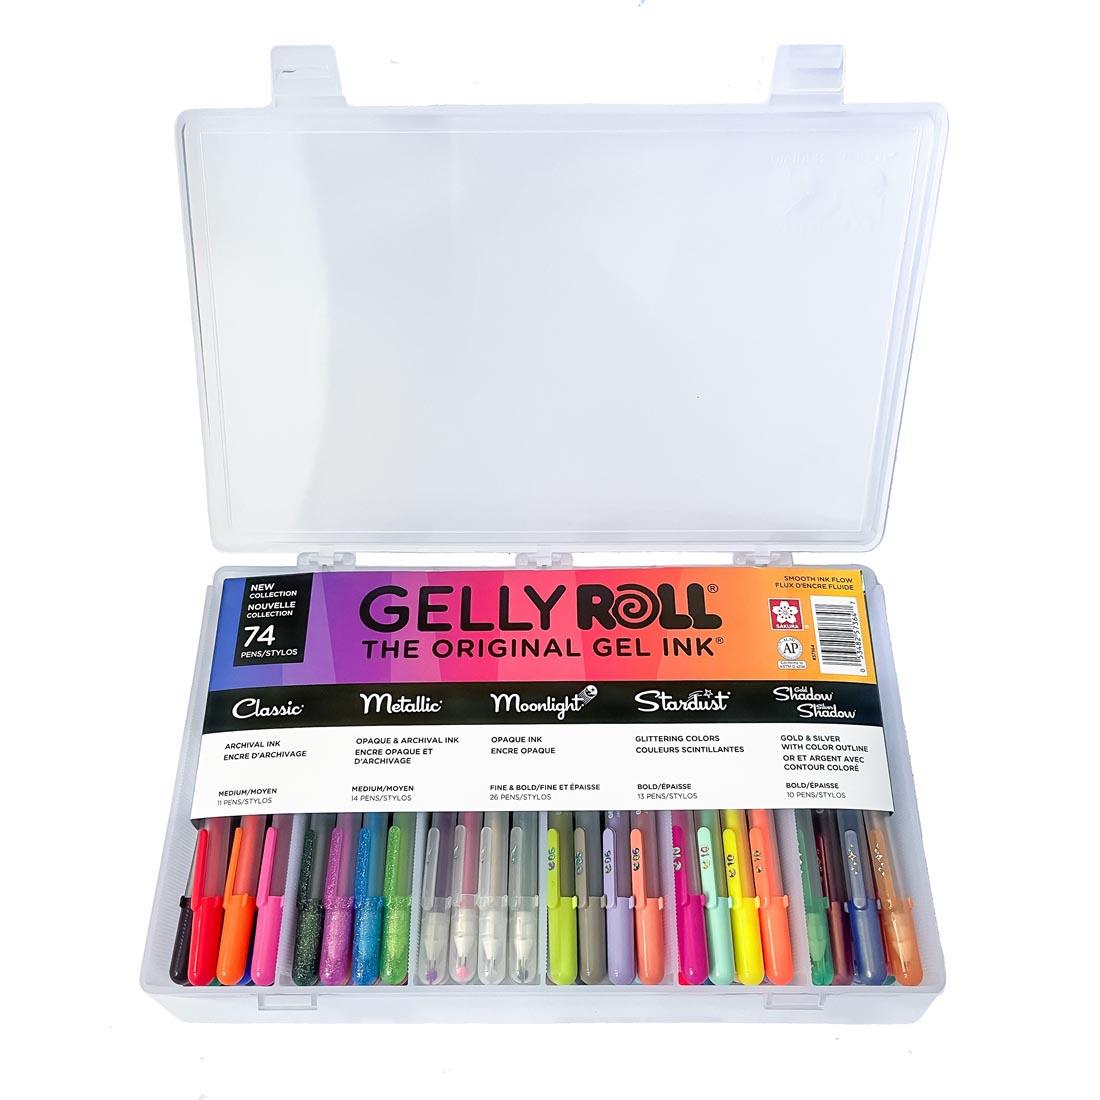 Sakura Gelly Roll 74-Count Class Pack in a clear case with lid open